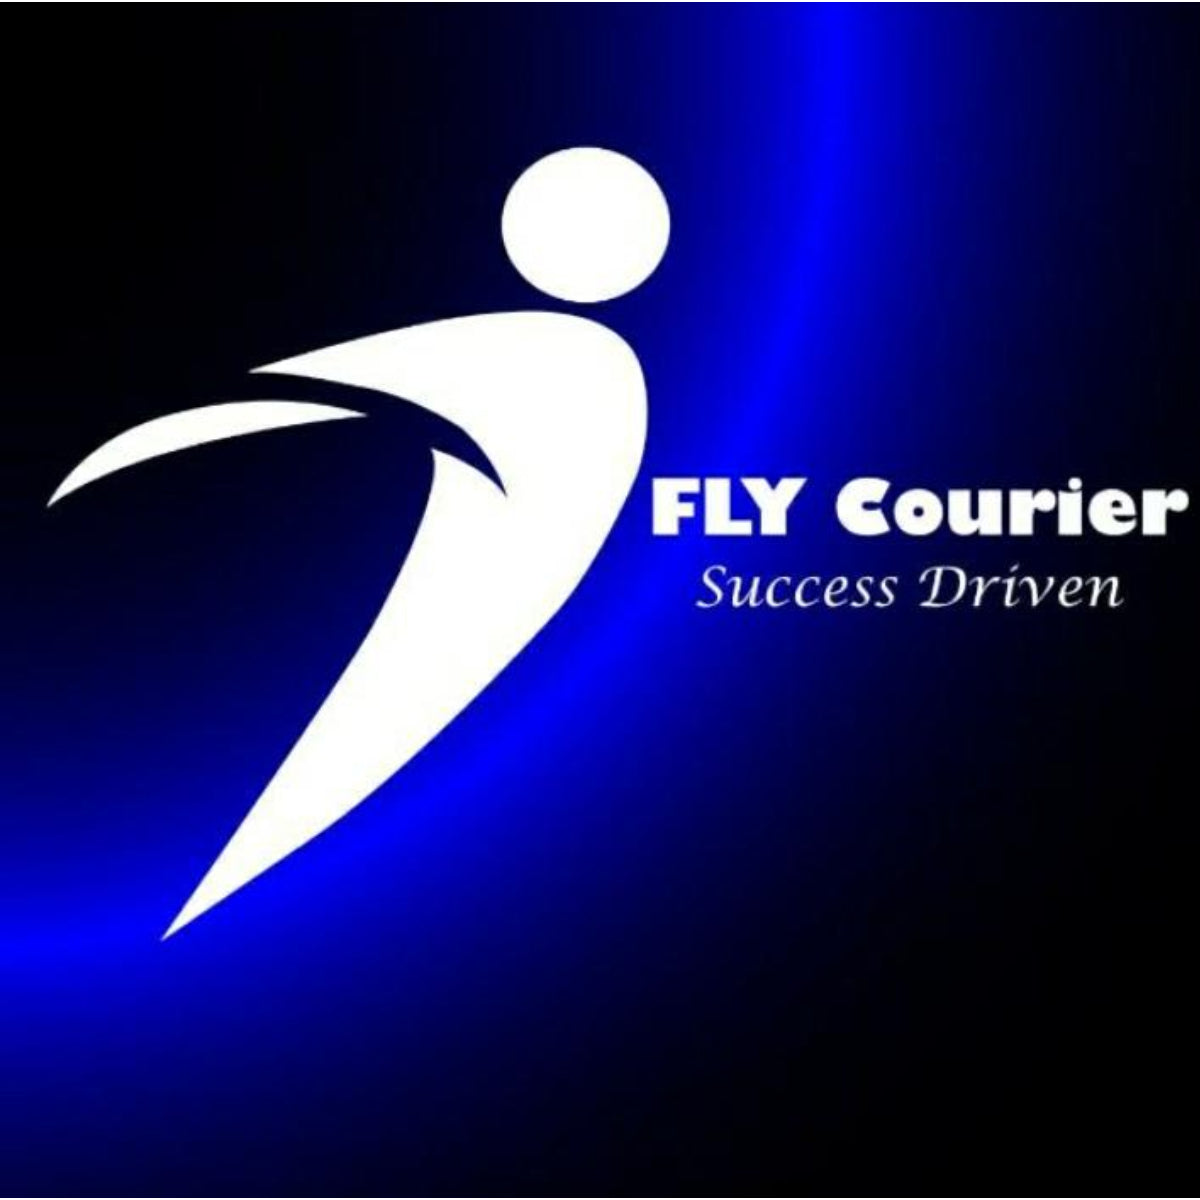 Hire Shopify Experts to integrate Fly Courier app into a Shopify store